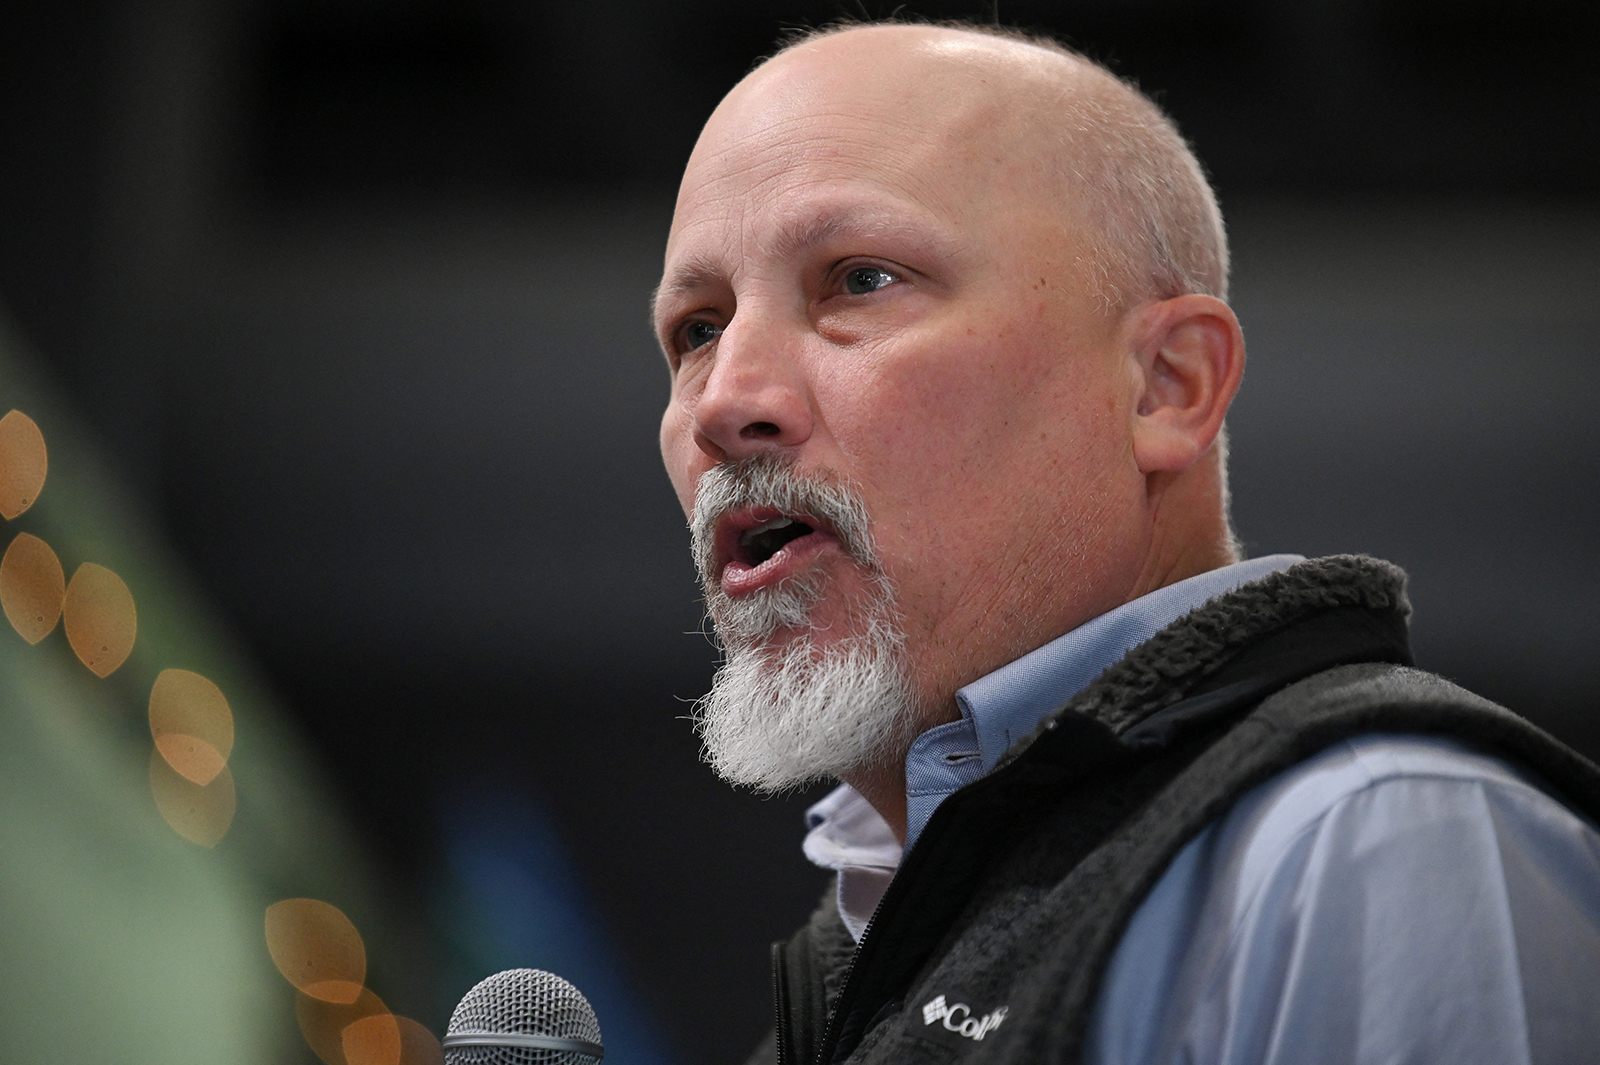 Rep. Chip Roy speaks at an event in Grimes, Iowa, on January 7. 